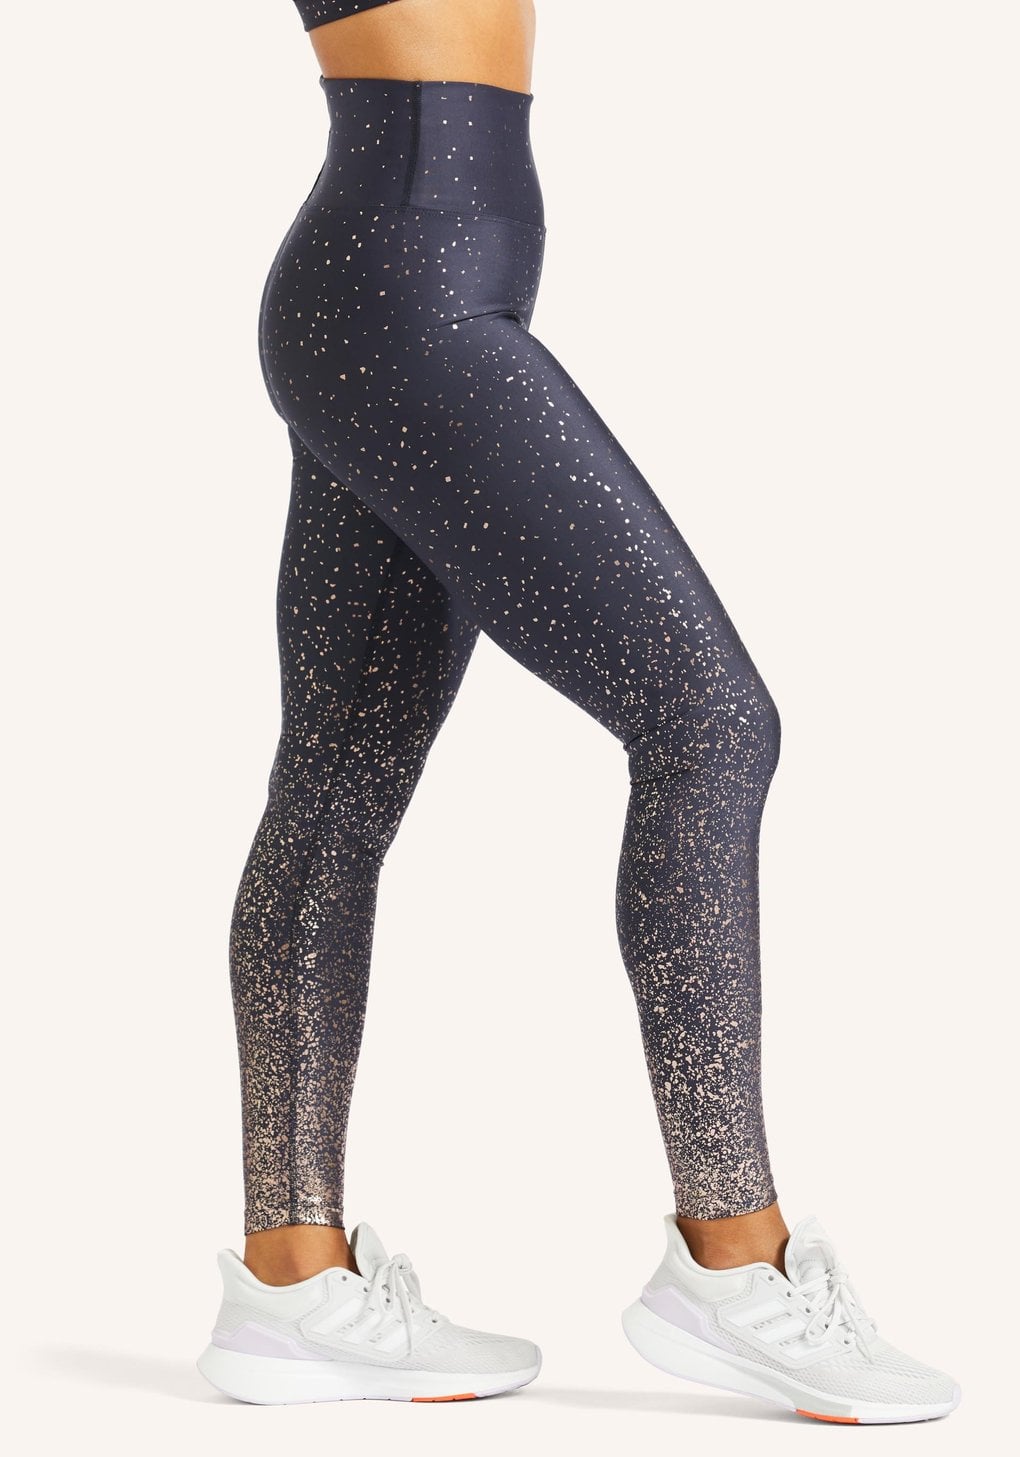 Beyond Yoga Alloy Ombré Leggings  If You Have a Big Butt, These